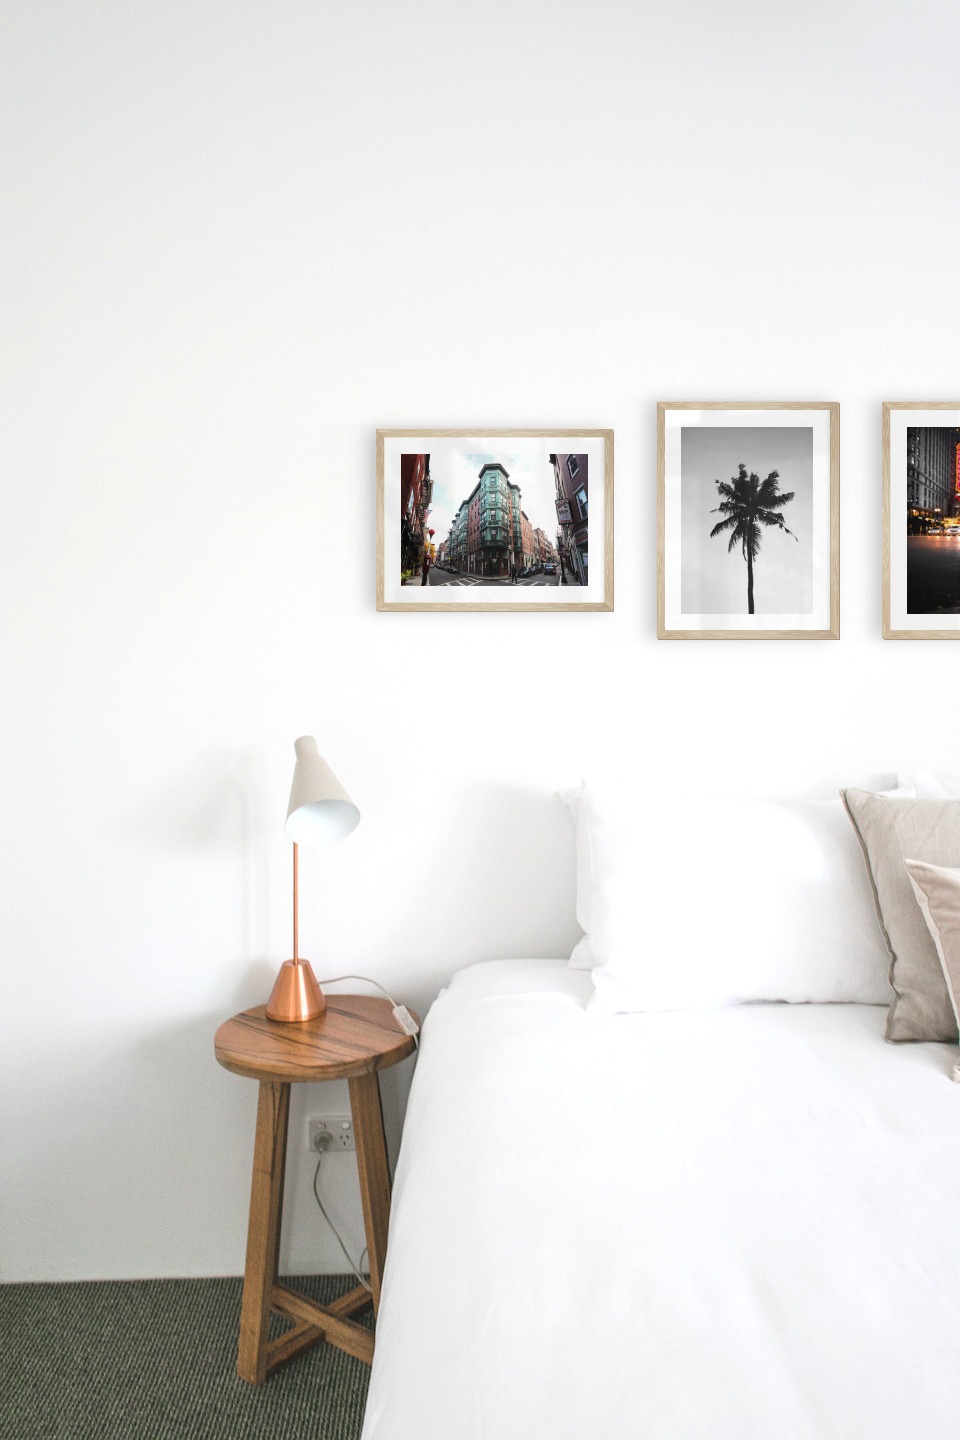 Gallery wall with picture frames in wood in sizes 30x40 with prints "Street corner", "Palm" and "Busy city center"